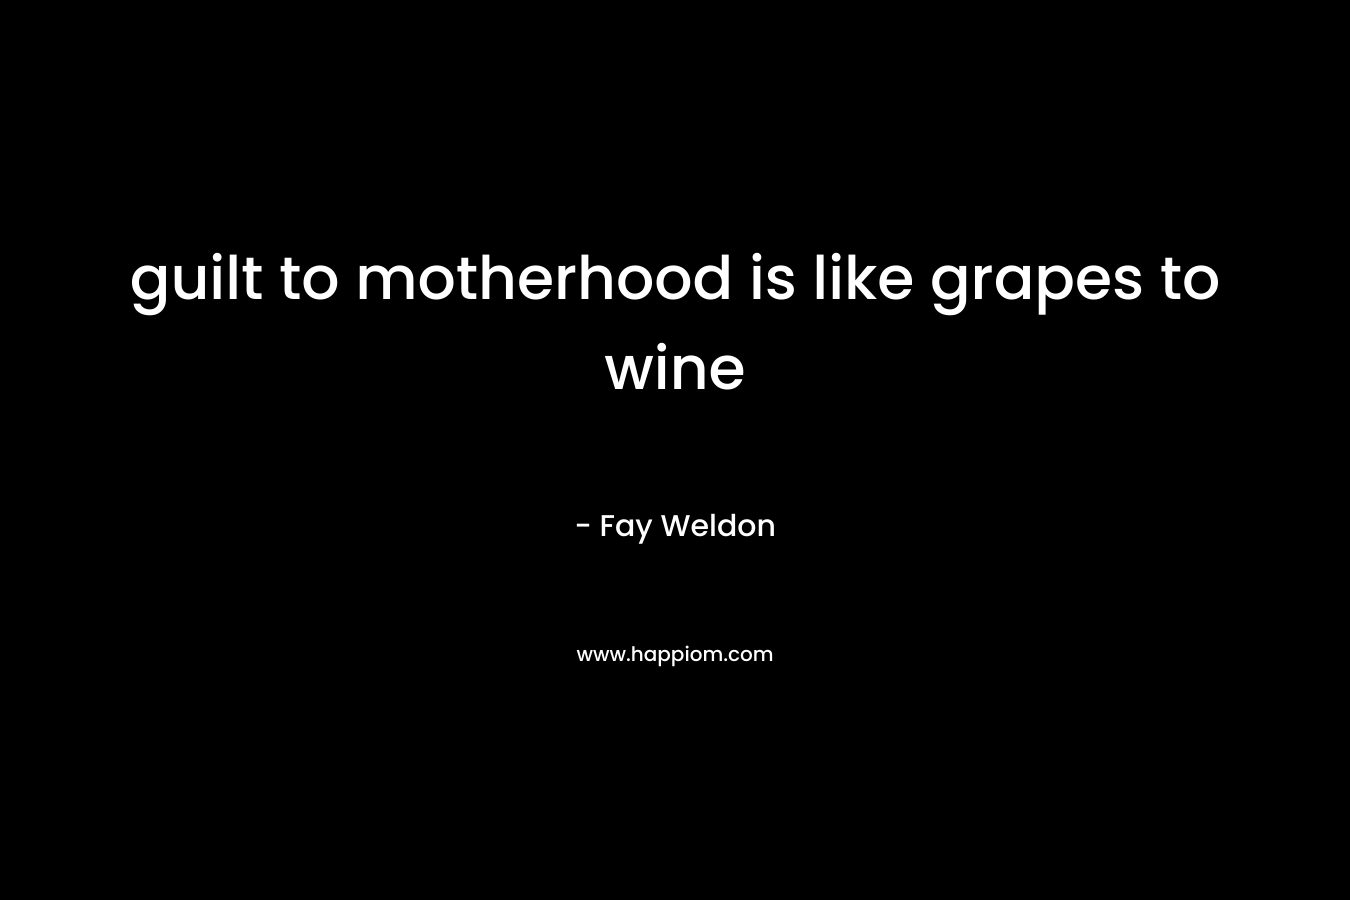 guilt to motherhood is like grapes to wine